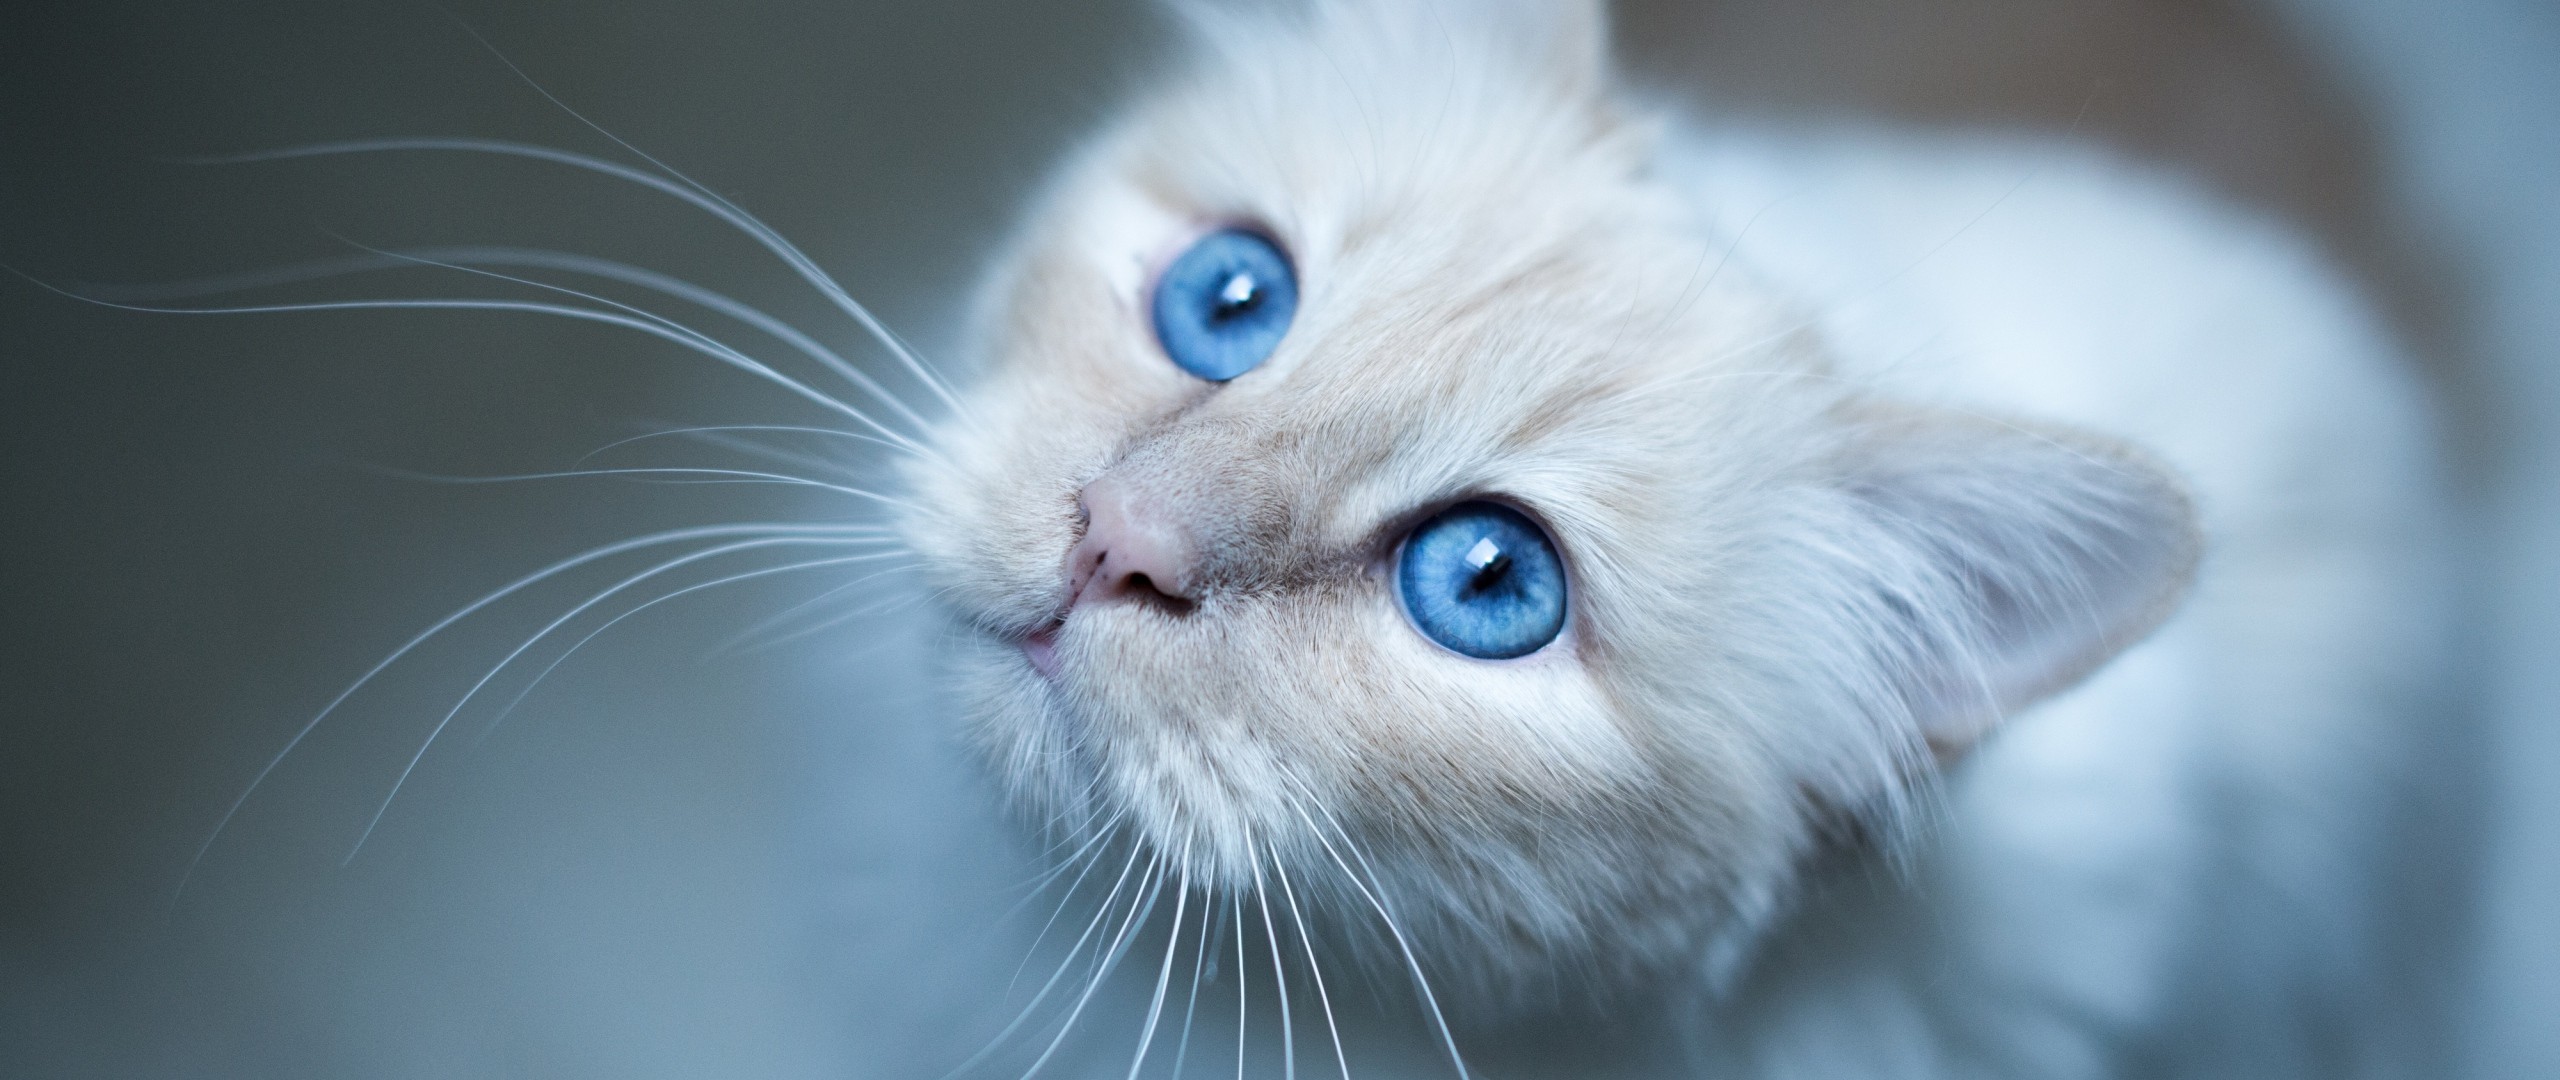 General 2560x1080 cats blue eyes whiskers blurred animals mammals closeup animal eyes